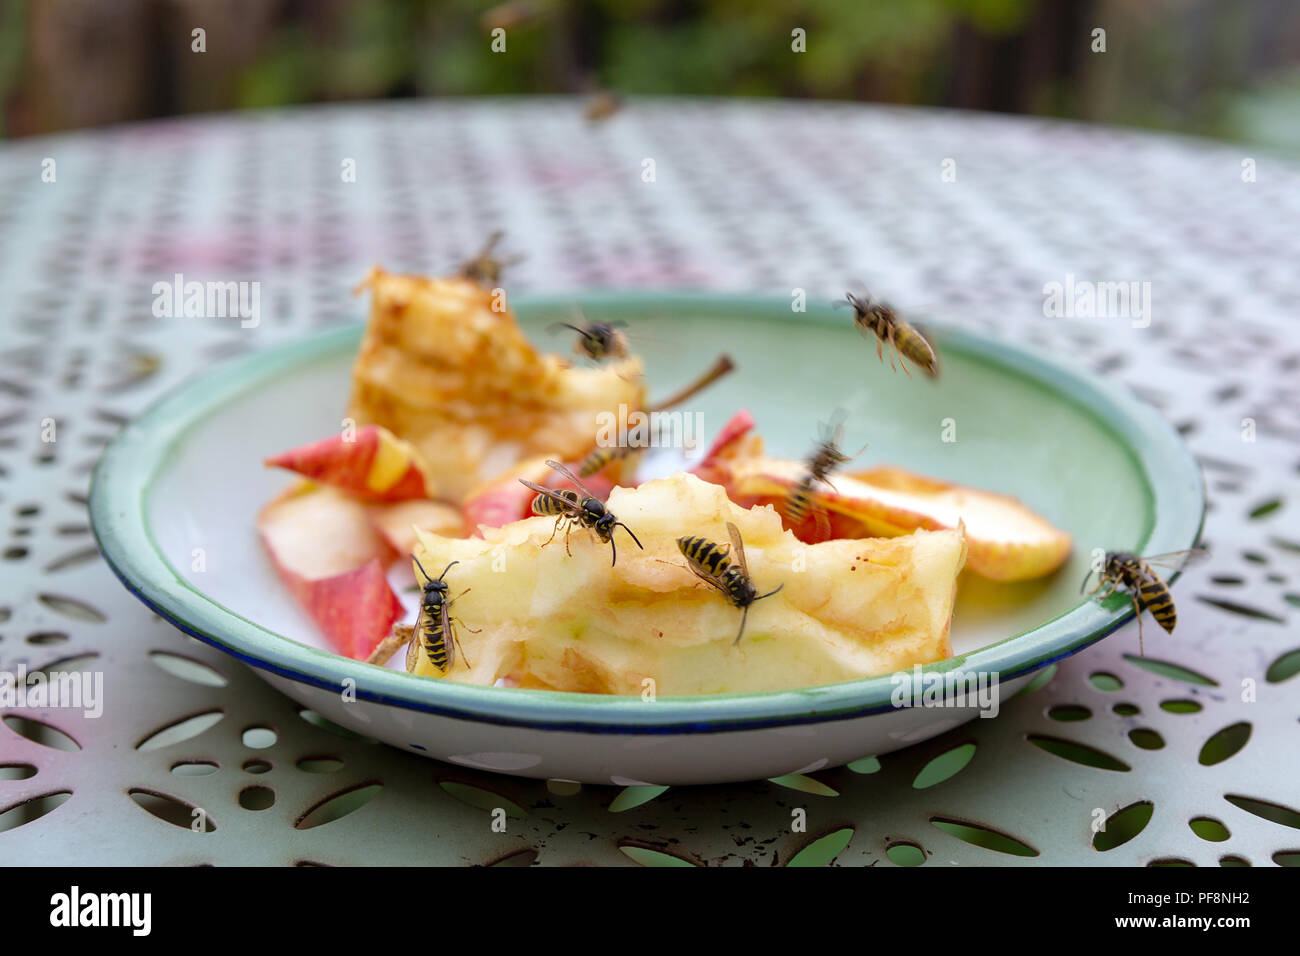 A group of Social Wasps - Vespula germanica - feeding outdoors on apple left overs on the table. Stock Photo